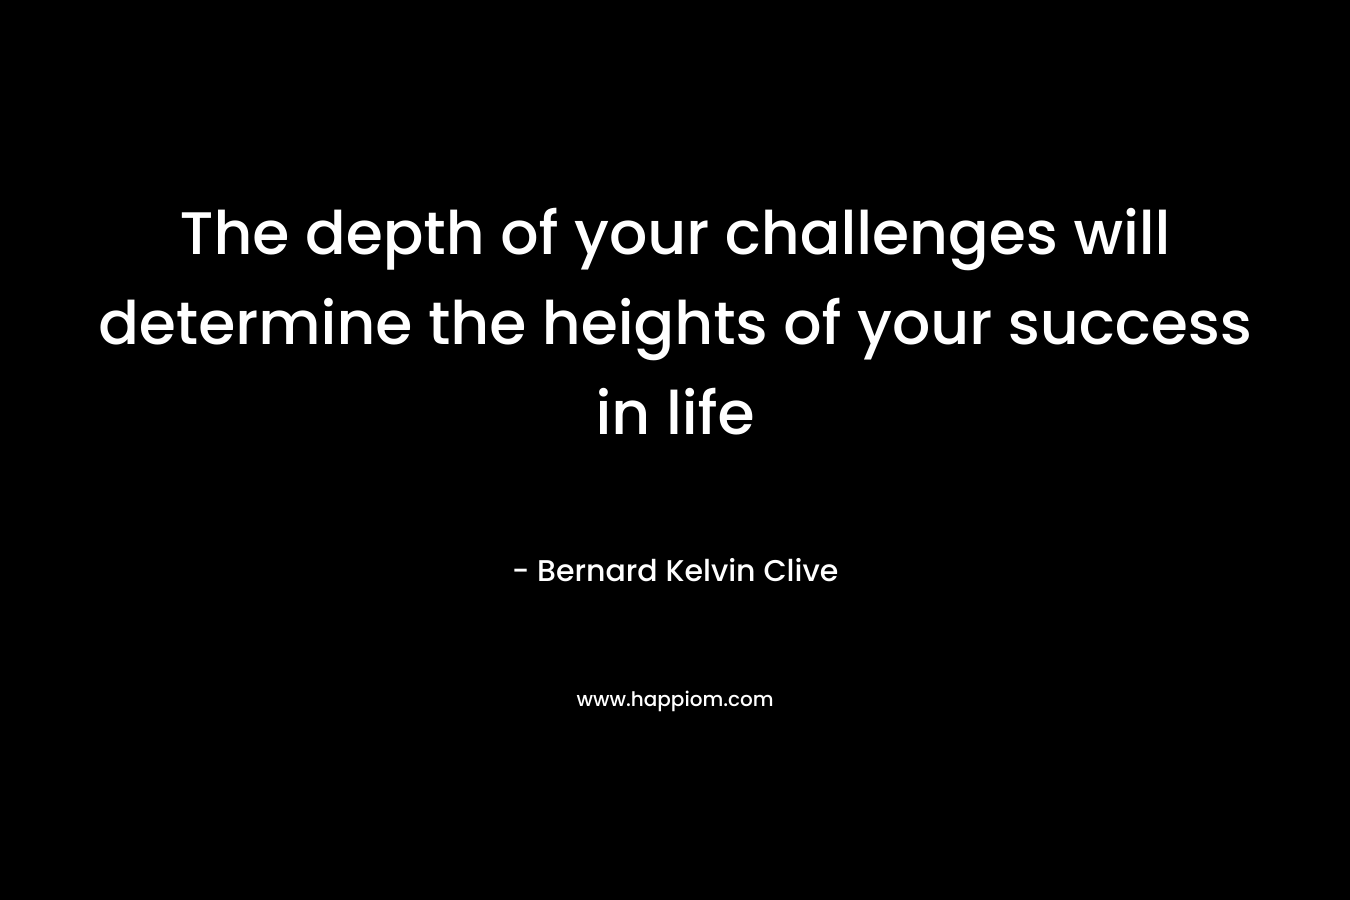 The depth of your challenges will determine the heights of your success in life – Bernard Kelvin Clive